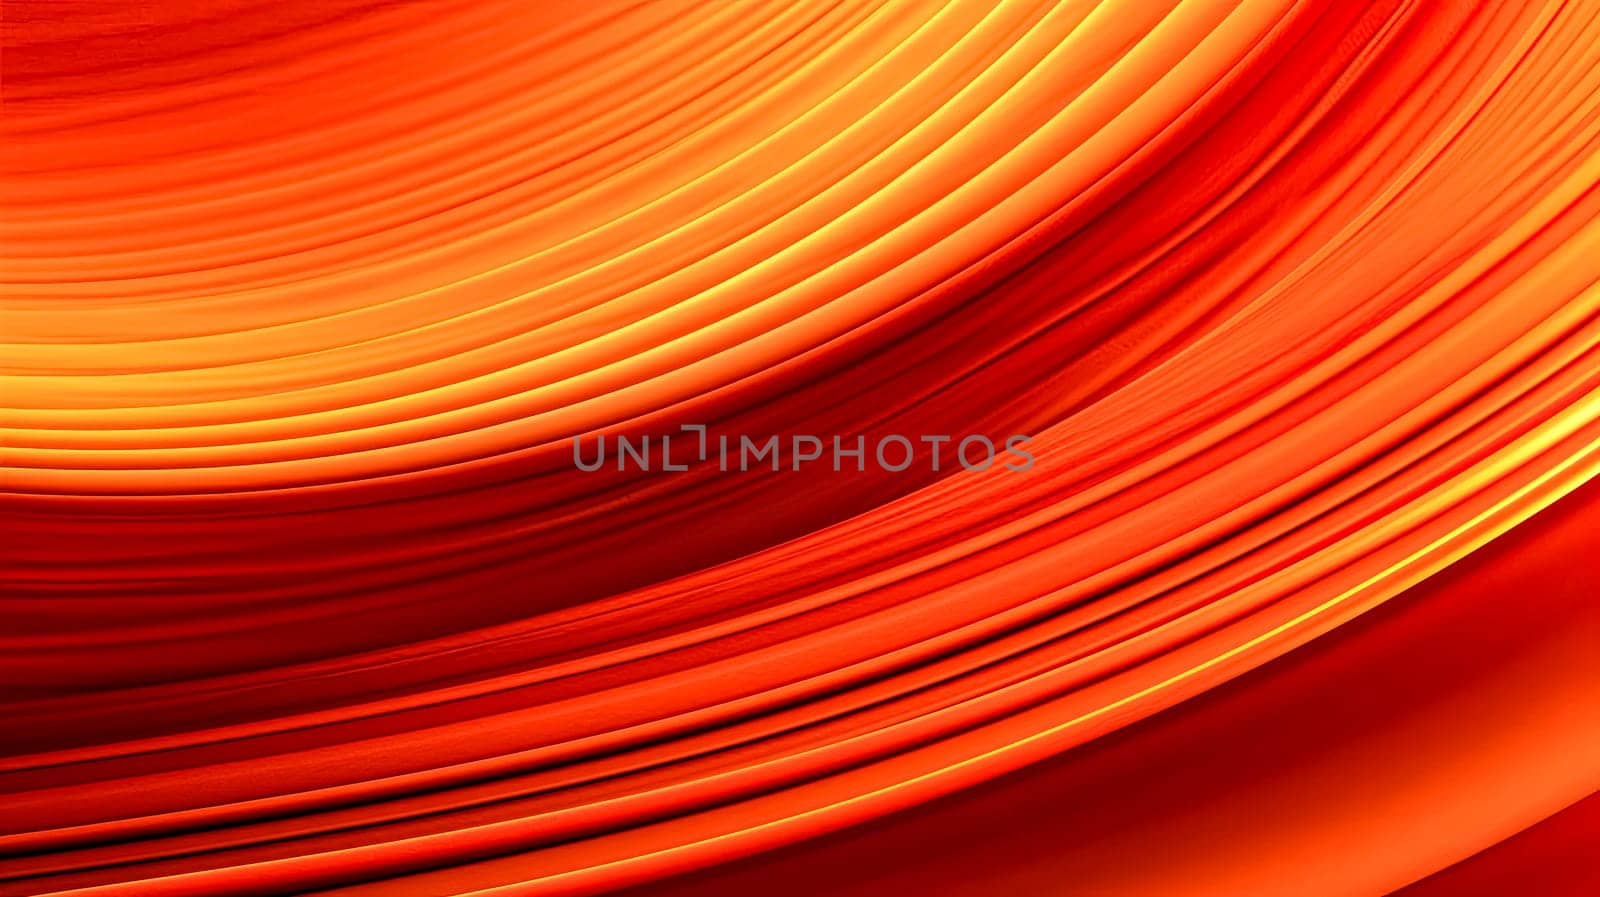 The image is a close up of a red line that is curved and has a lot of detail. The line is orange and he is a part of a larger design. Scene is one of focus and attention to detail